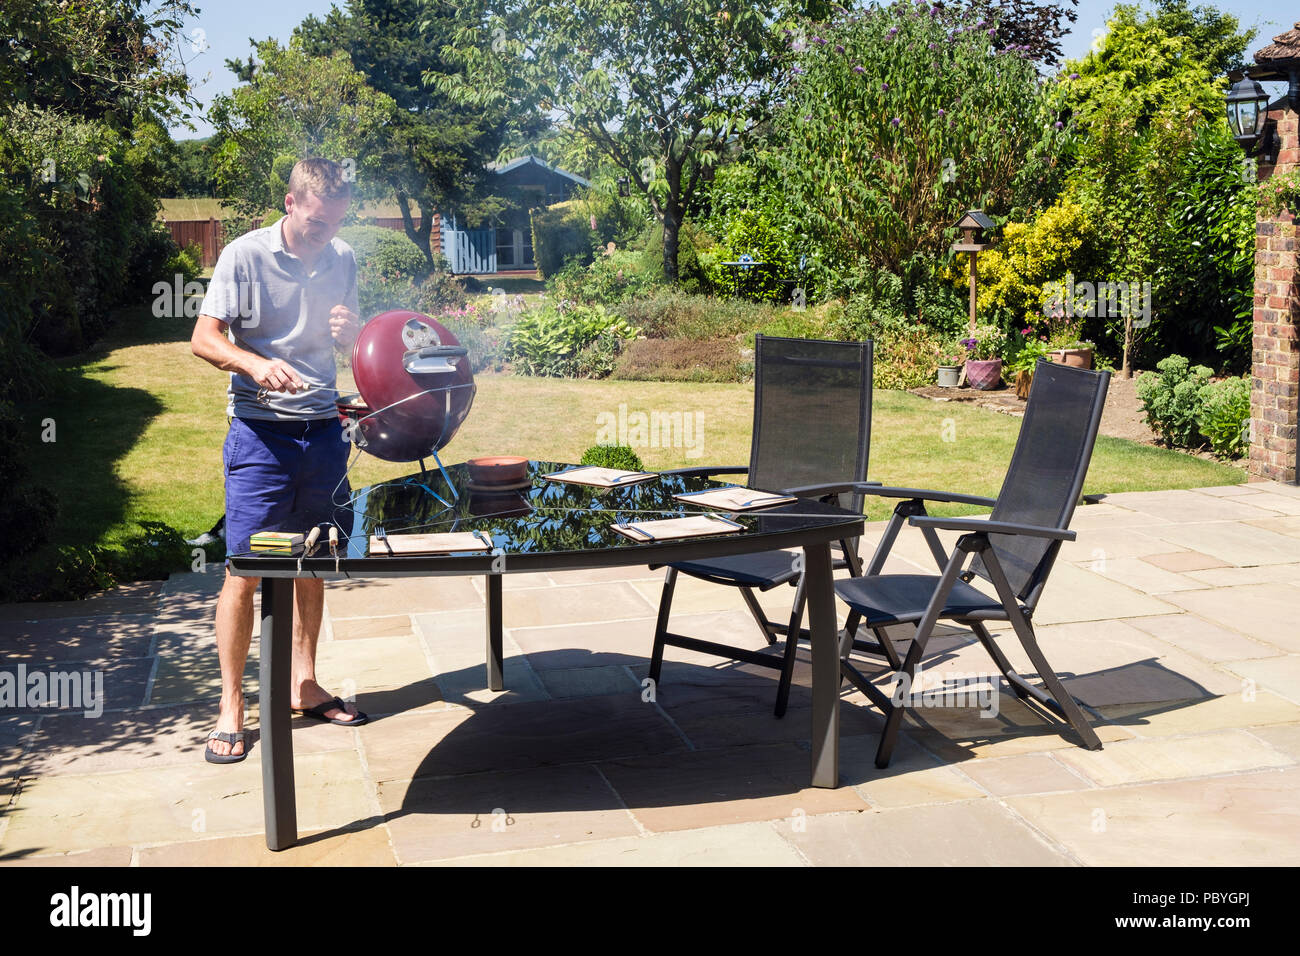 Authentic image of a young Millennial man cooks on a BBQ on a domestic backyard garden table on a patio in hot summer of 2018. England, UK, Britain Stock Photo